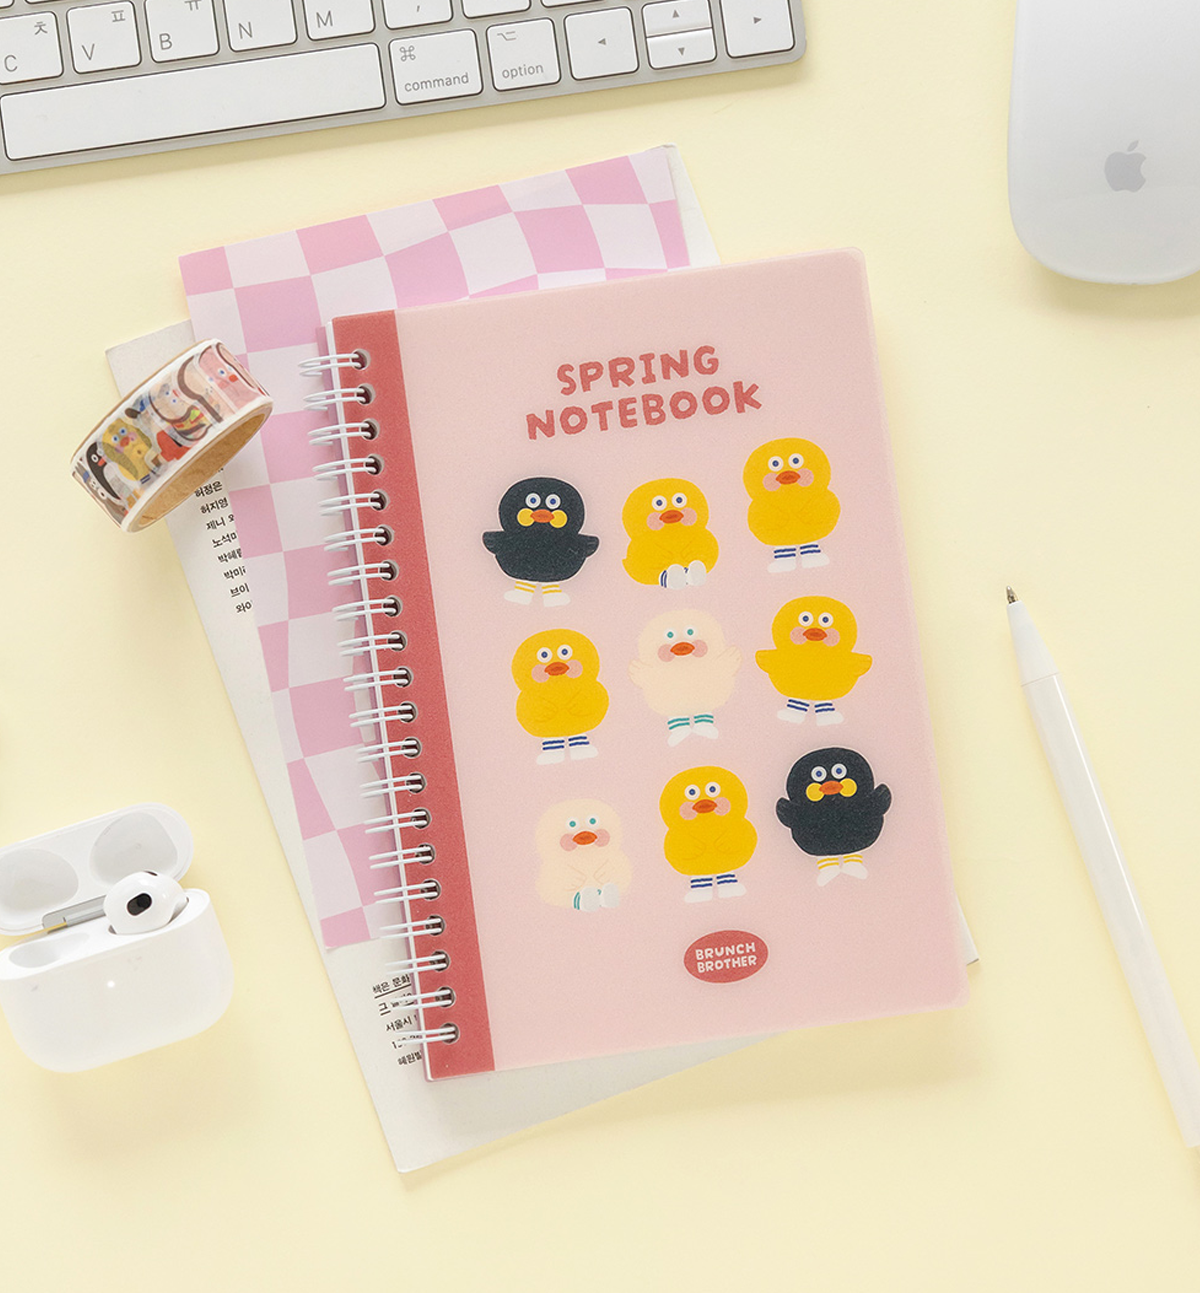 B6 Brunch Brother Line & Blank Ring Notebook